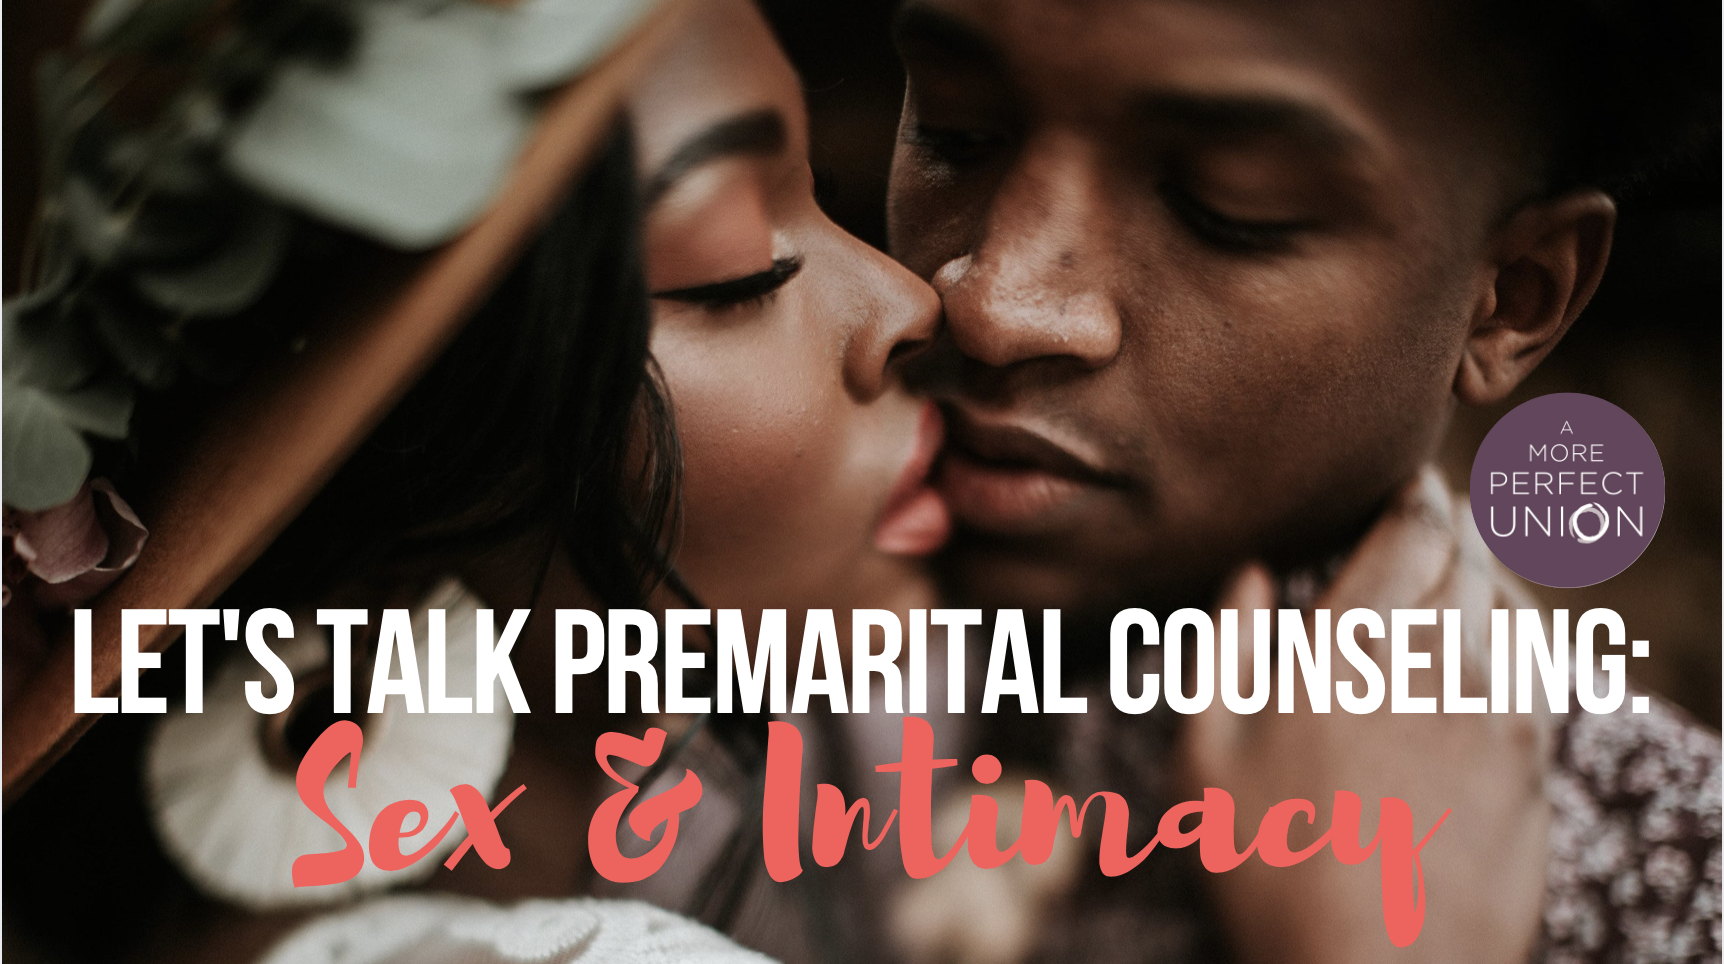 Premarital Counseling Sex and Intimacy — A More Perfect Union